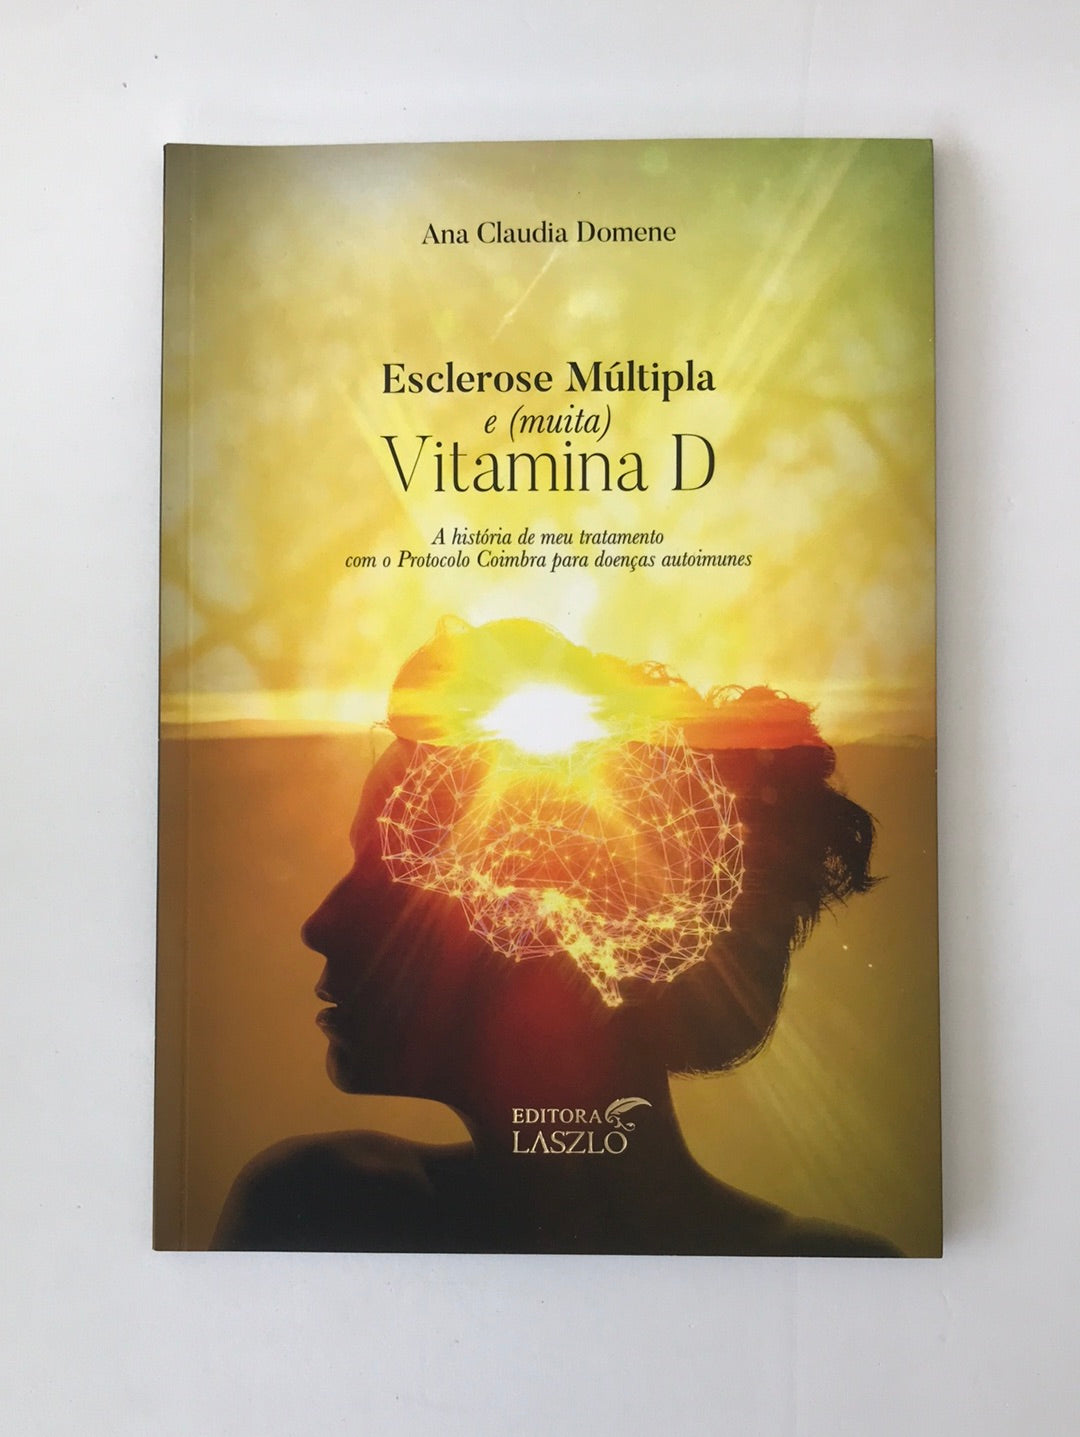 Multiple Sclerosis and Lots of Vitamin D